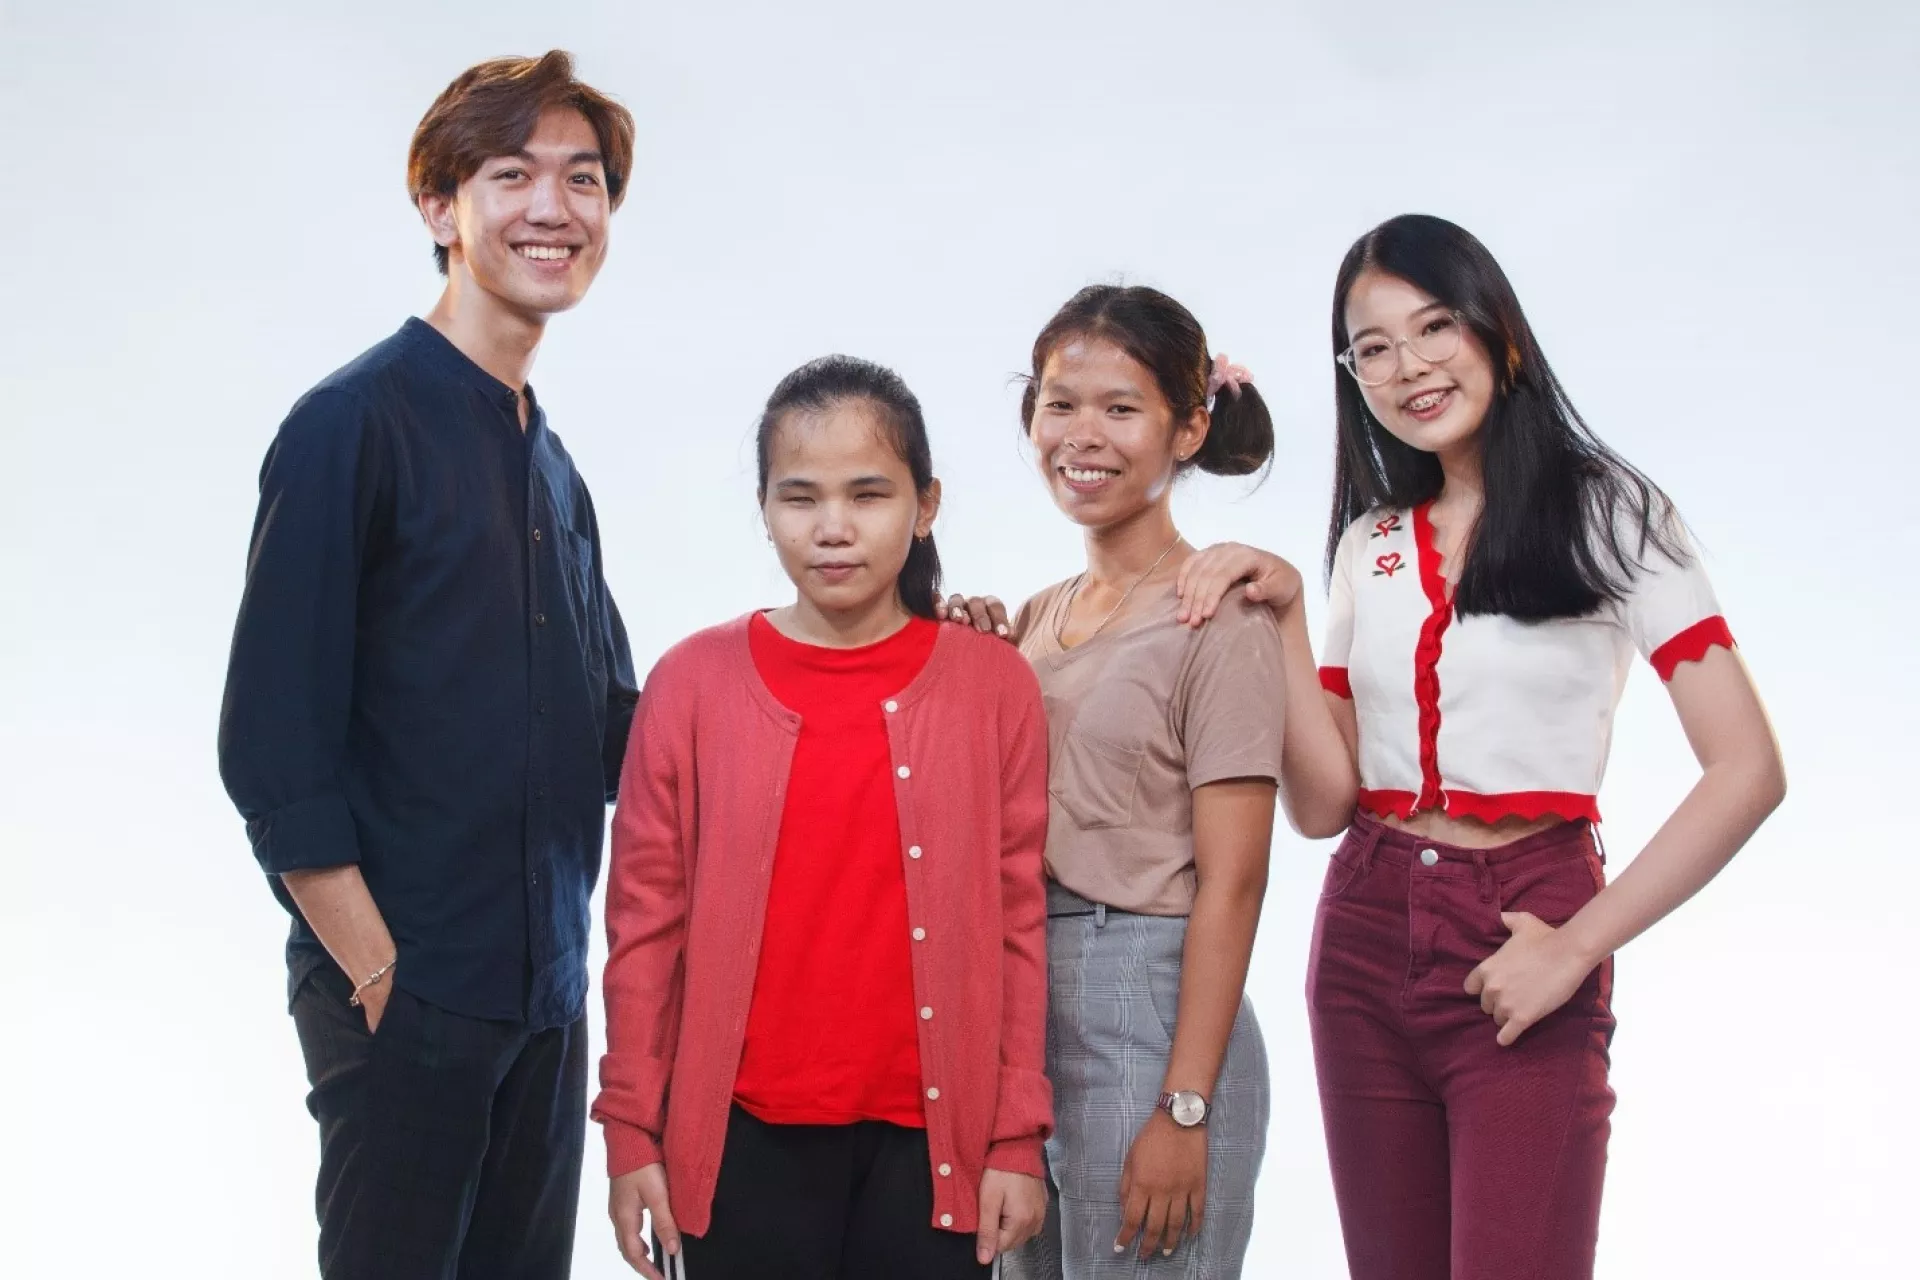 A group photo of young people who shared their stories on UNICEF's The Sound of Happiness special episodes. From left to right: Ame Ammarin Boonsaard, Palm Kamollug Tongdang, Oo, and Ya Prachaya Sirimahaariyapoya.